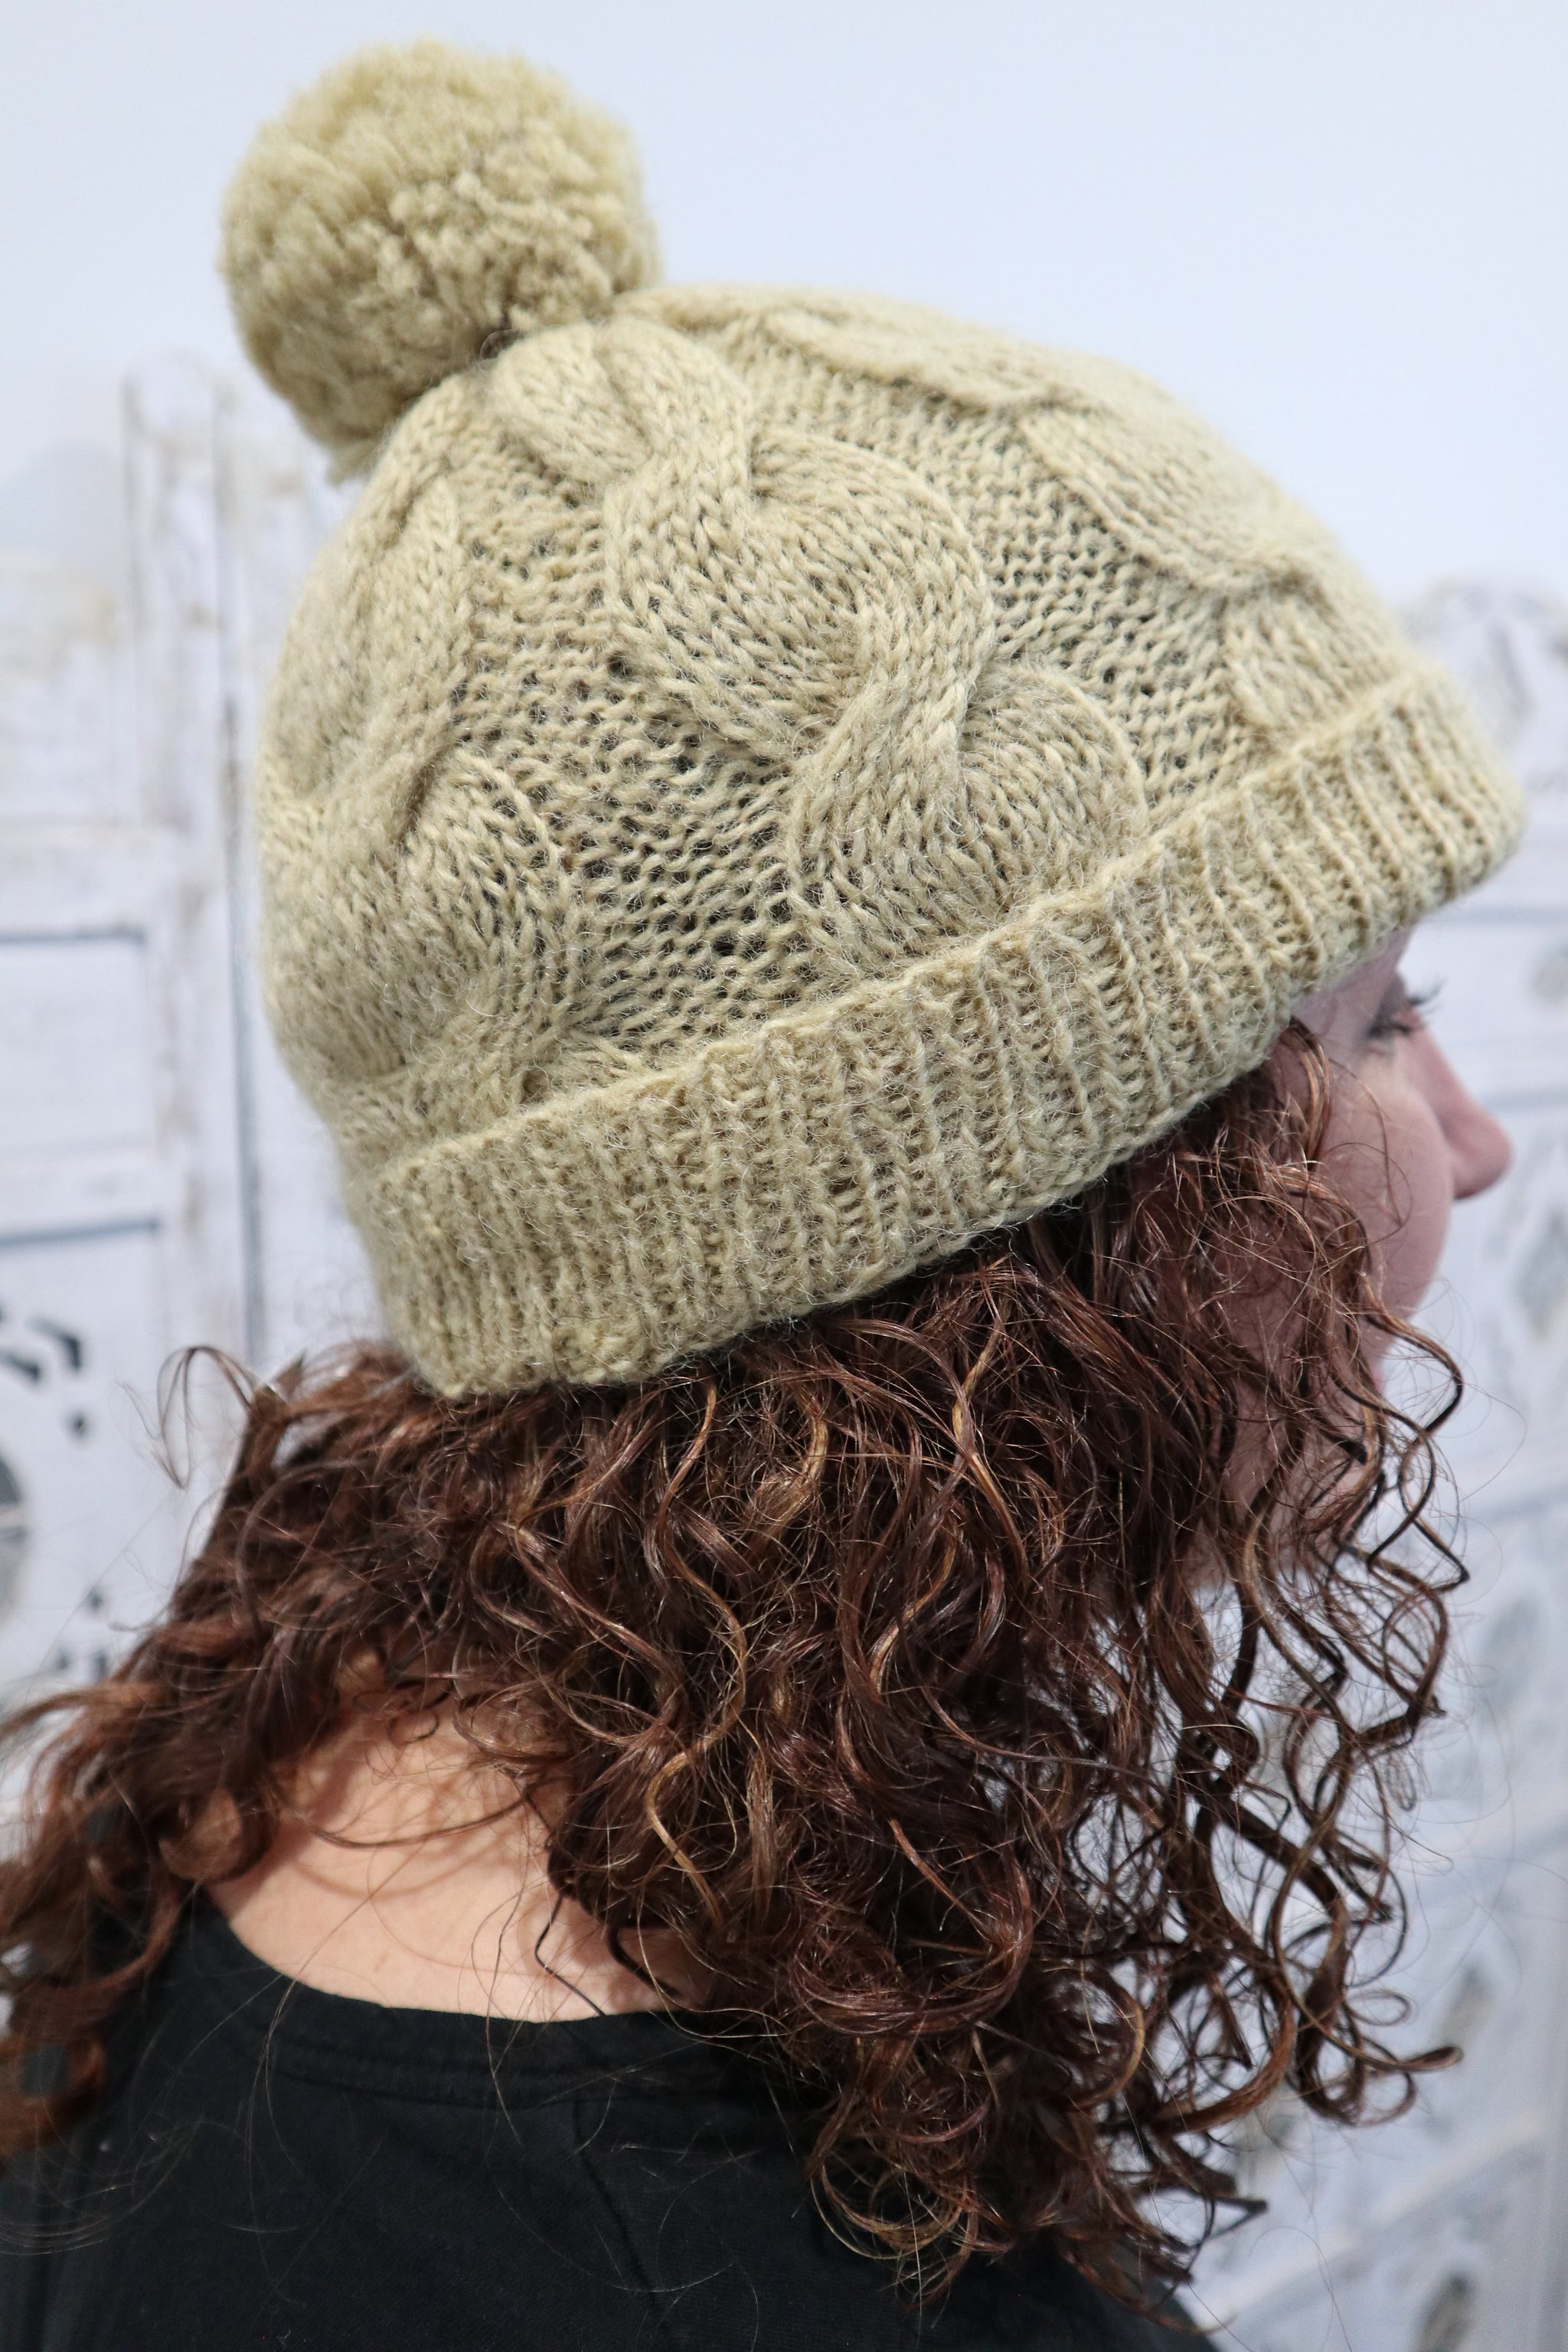 Fair Trade Ethical Cable Knit Beanie with Pom pom